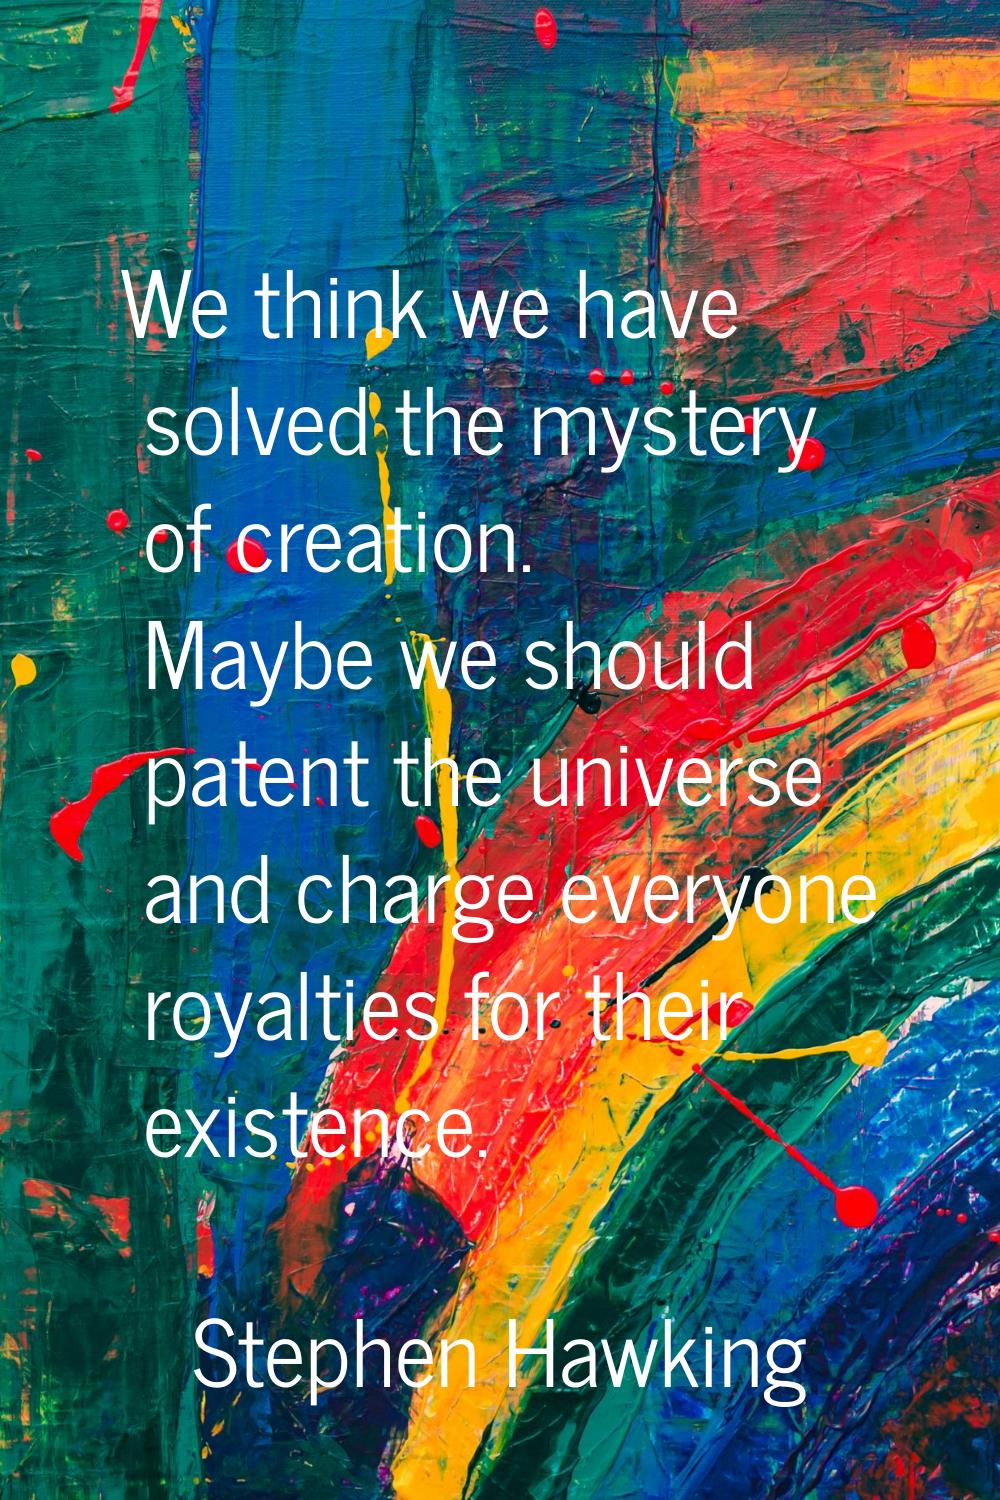 We think we have solved the mystery of creation. Maybe we should patent the universe and charge eve